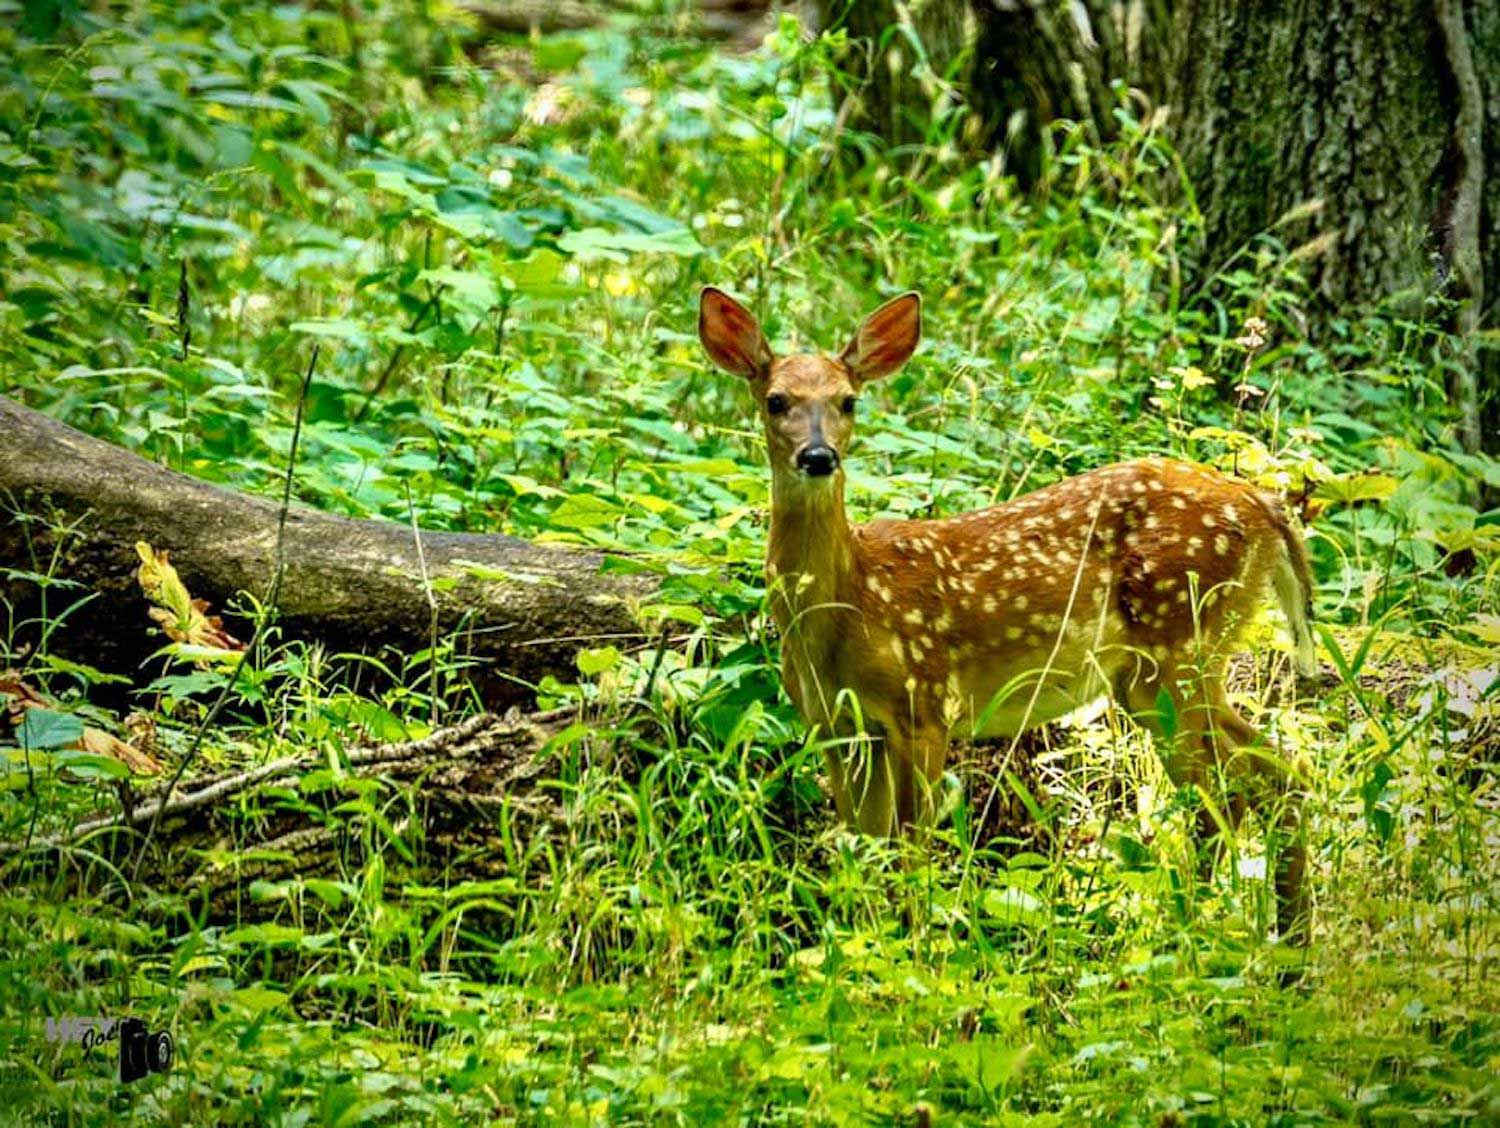 A fawn standing in tall vegetation with a fallen log behind it.